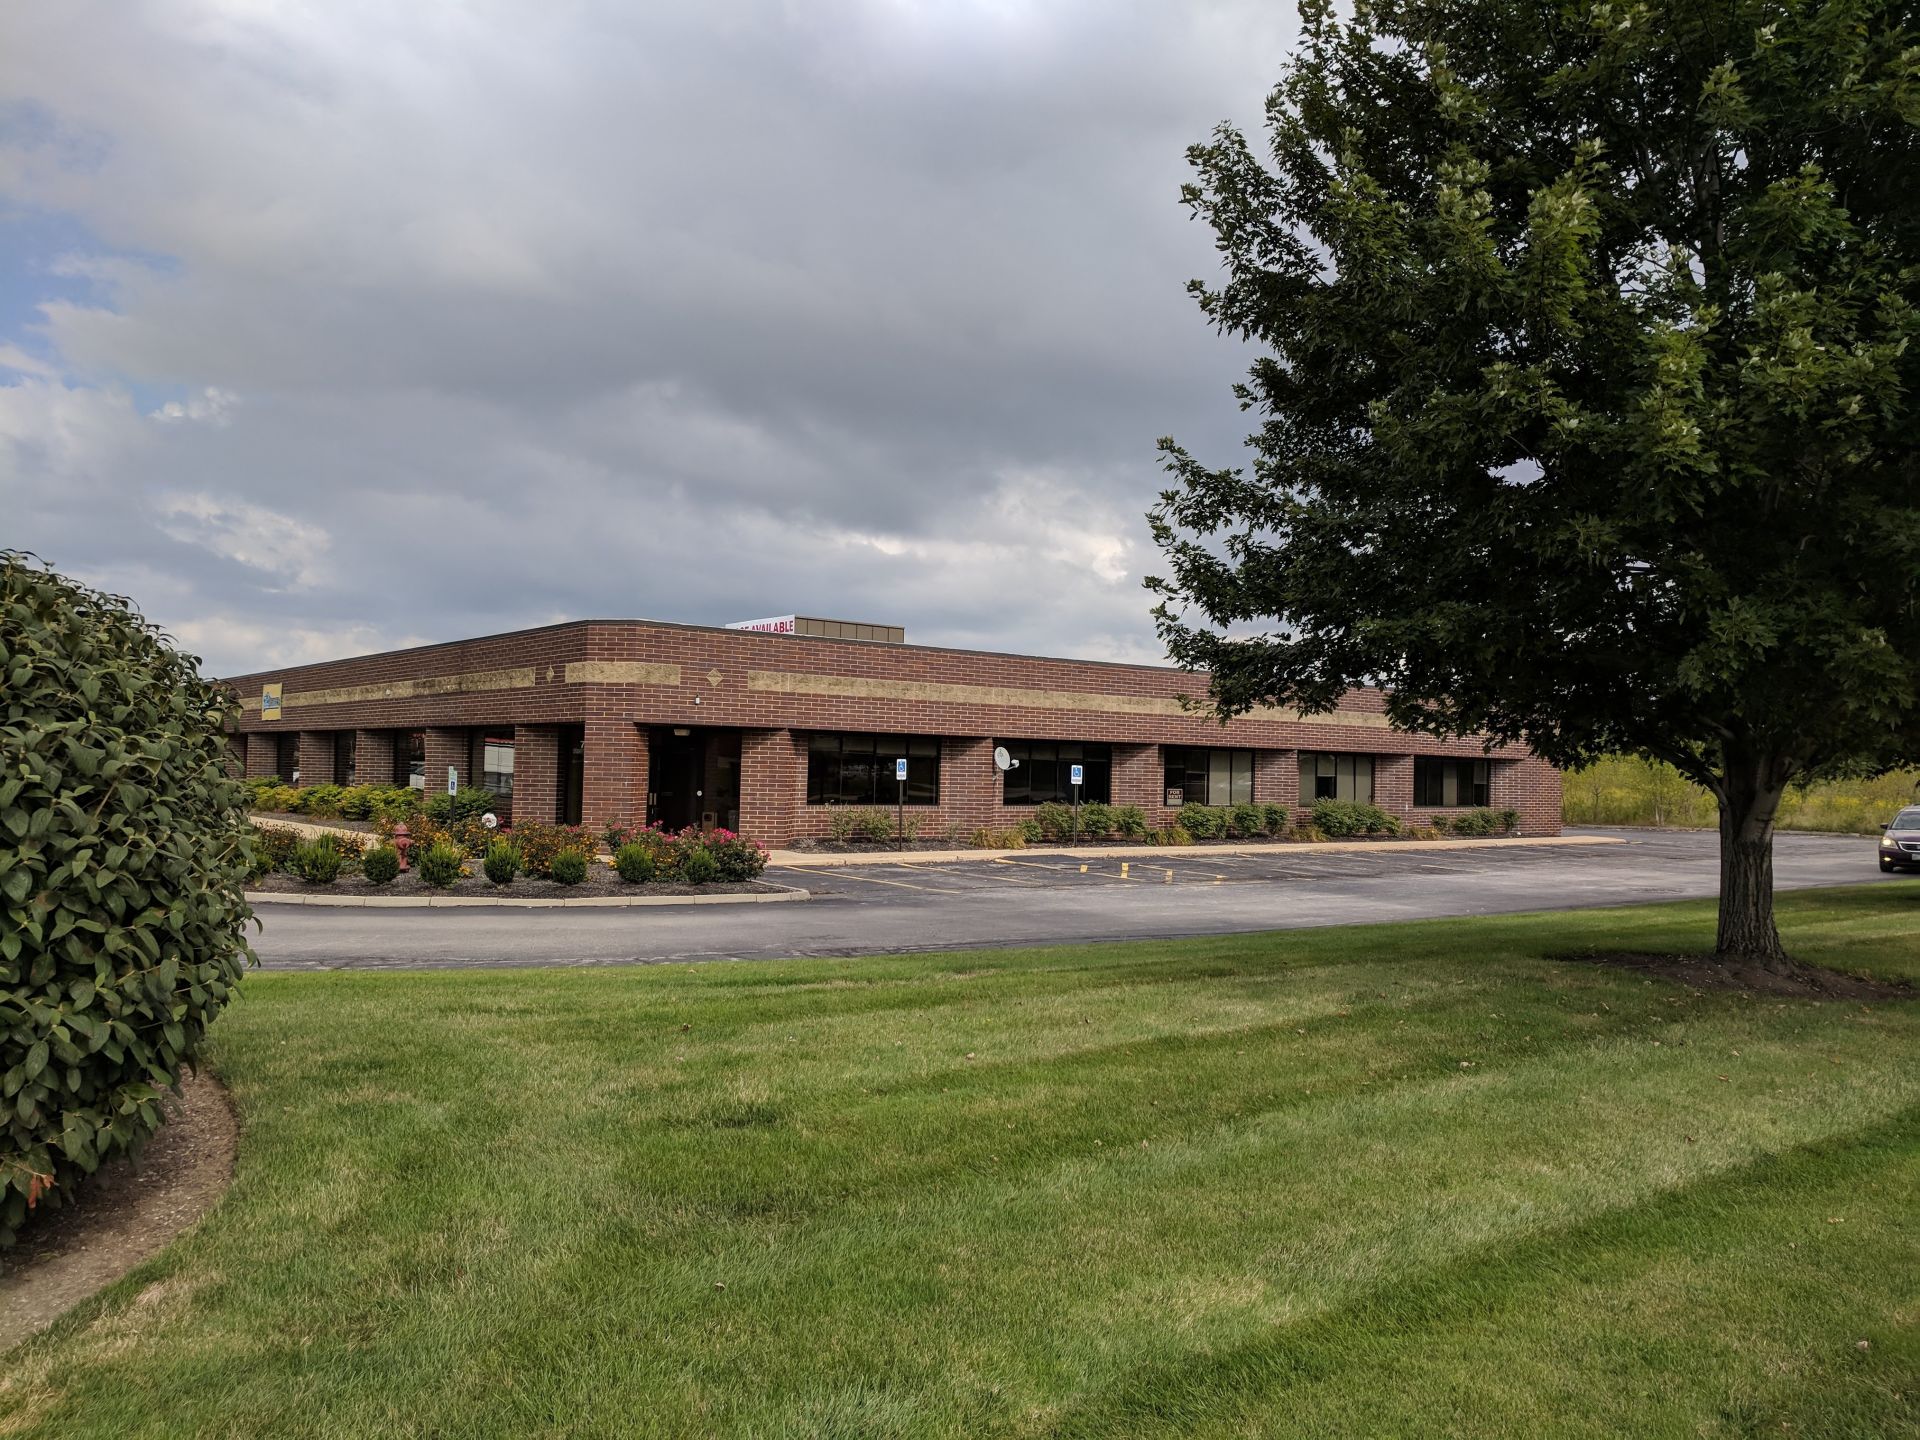 Industrial Condominium-8800 SF Medical/Office Space-For Sale/Lease